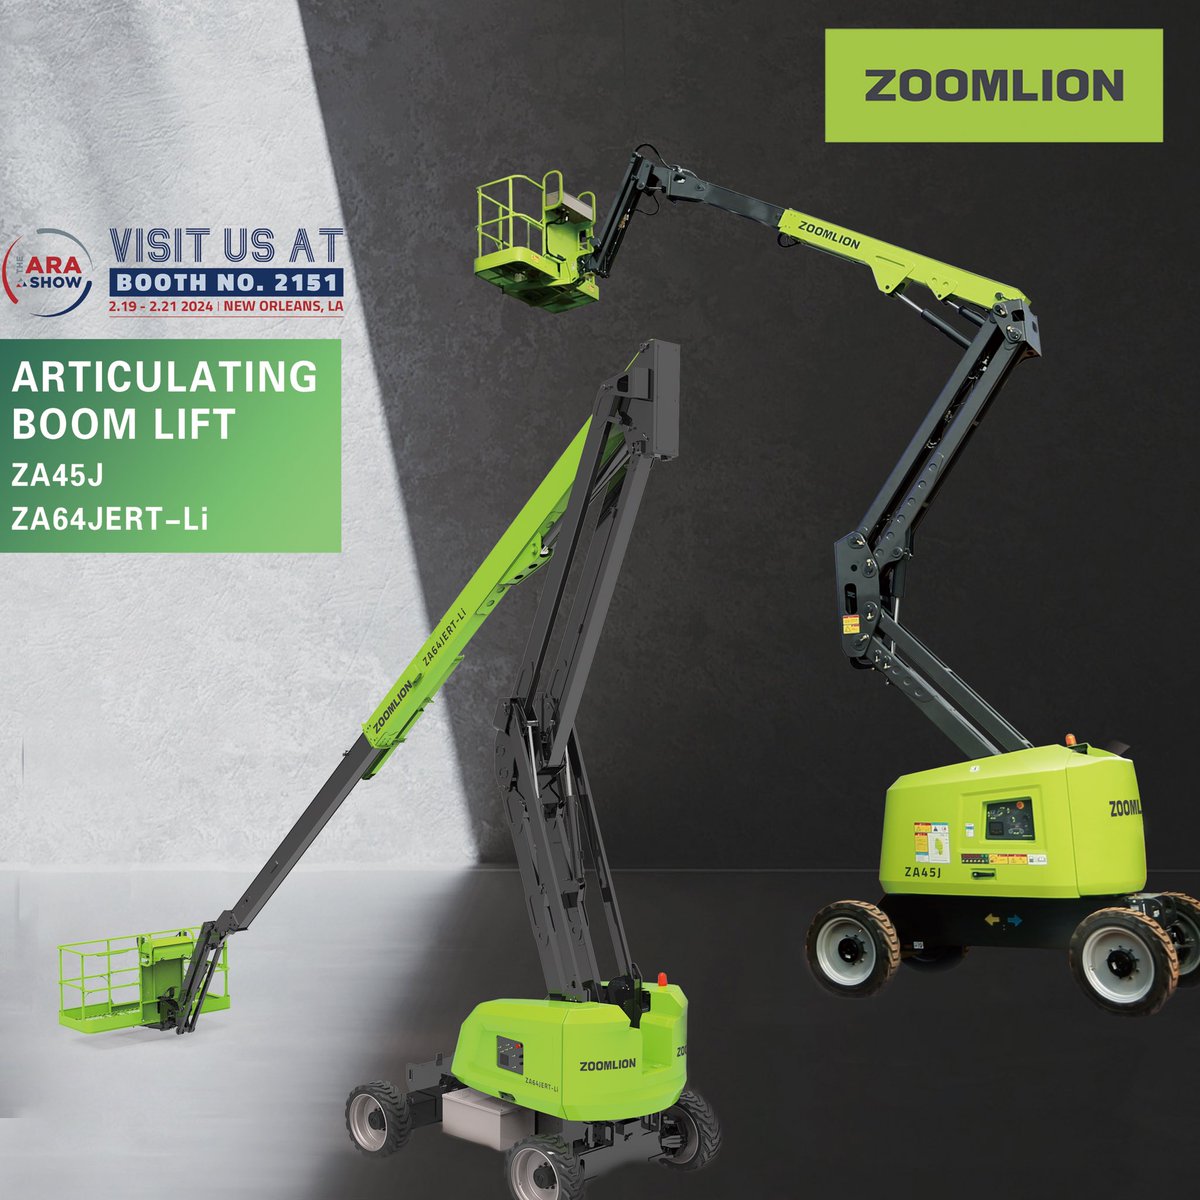 ⏳🚀 The countdown is on! Just one month until the #ARASHOW 2024 in New Orleans, LA. 🏗 Get ready for an exclusive preview of our state-of-the-art articulating boom lifts at Booth 2151. #ZOOMLIONACCESS is set to unveil groundbreaking innovations！